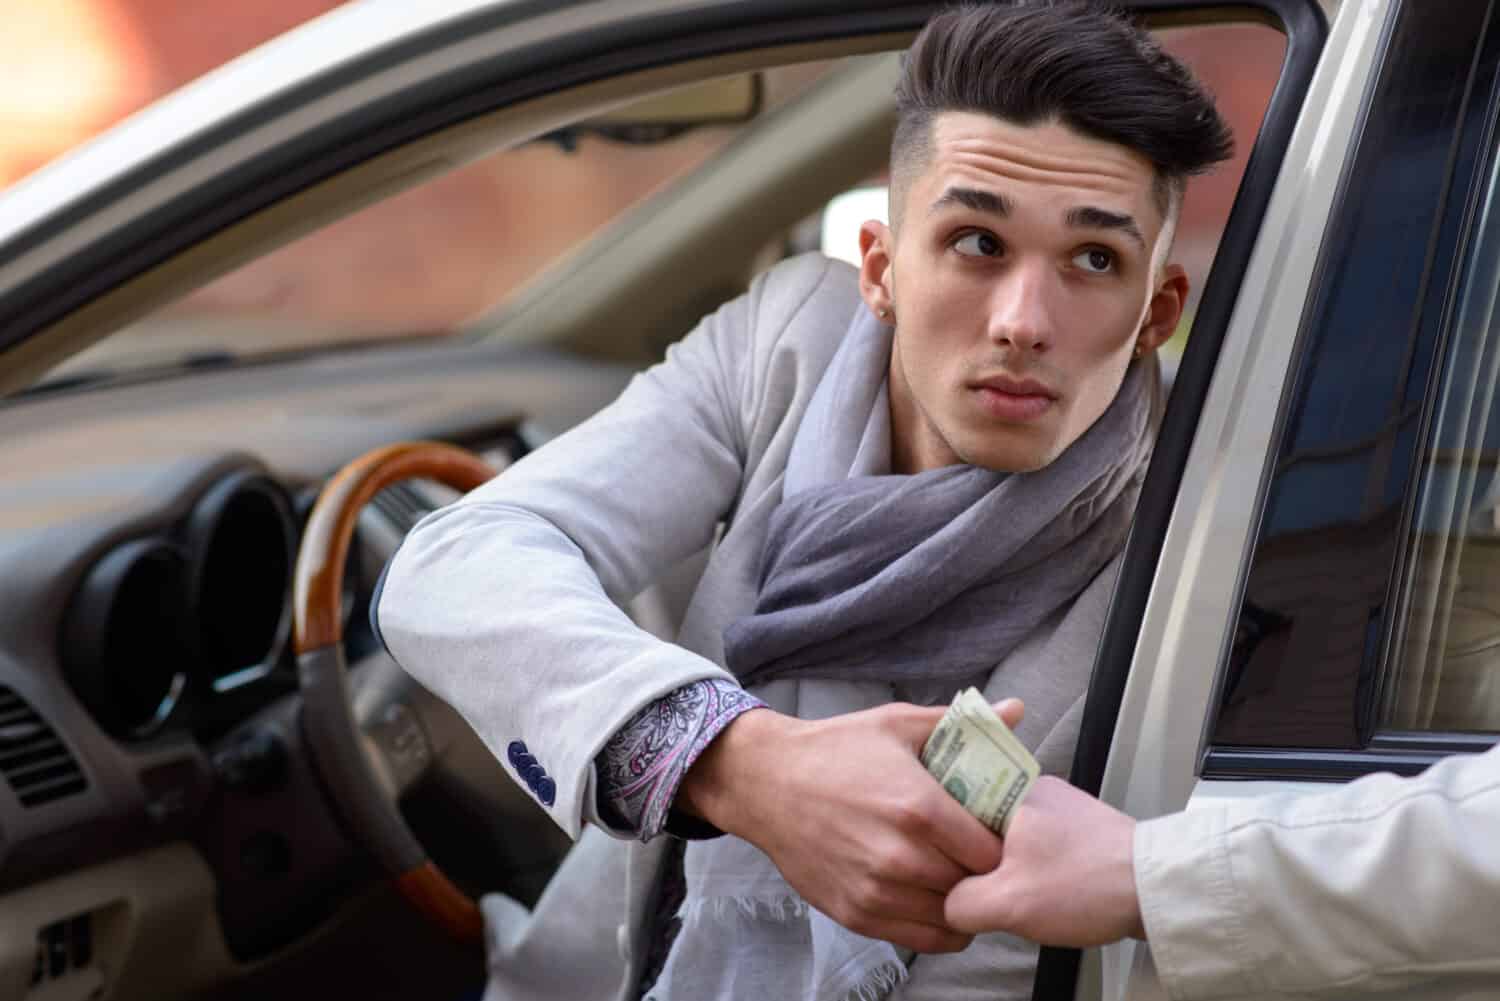 man sitting behind the wheel of the car gives money to another man